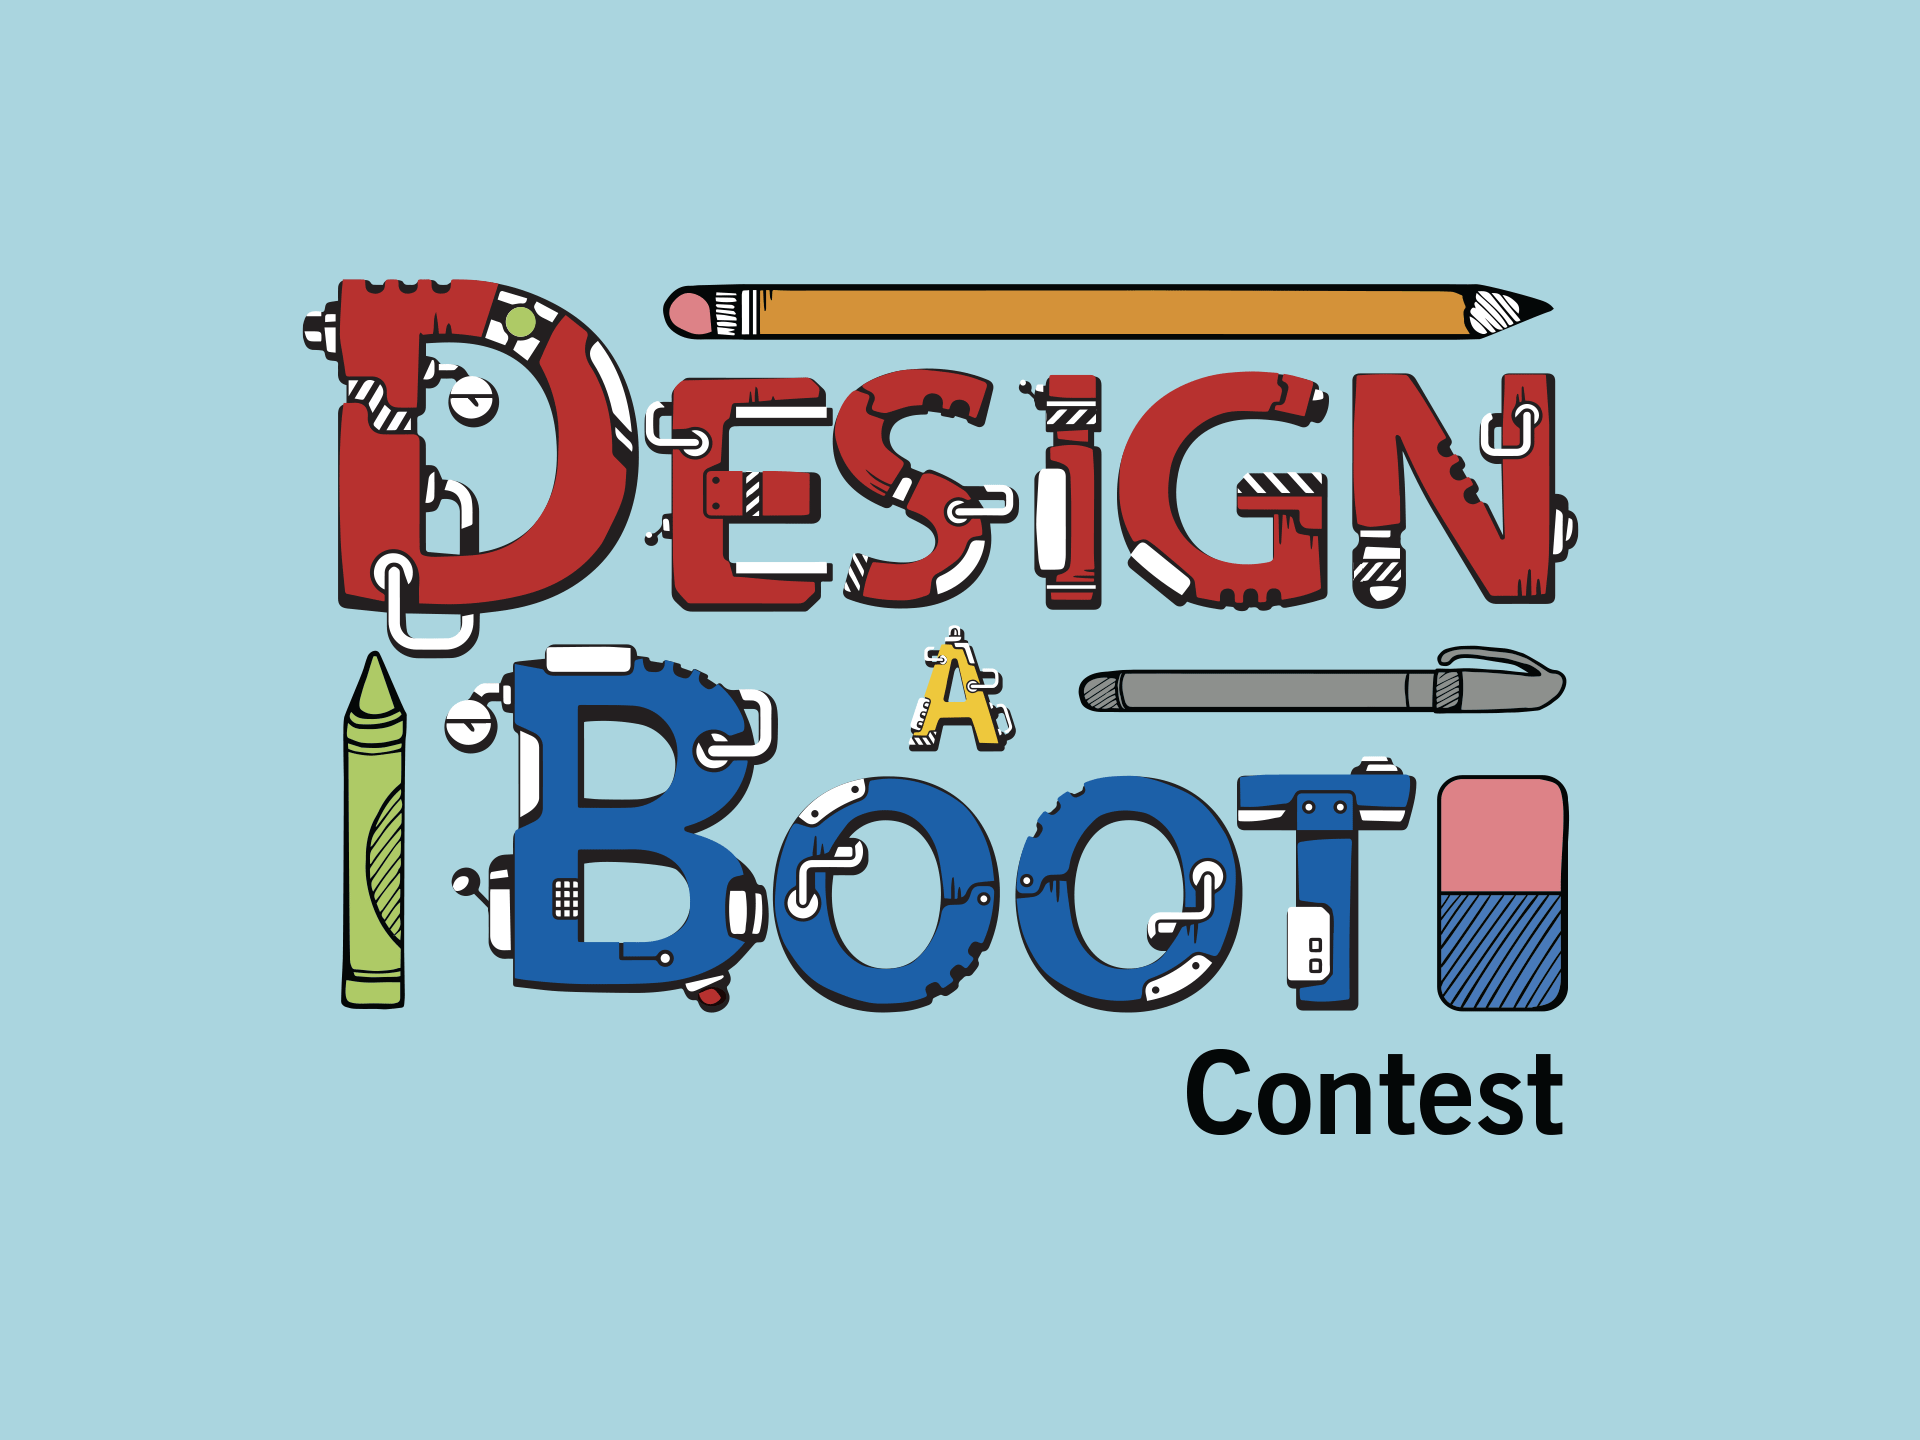 Announcing our bi-annual Design a Boot Contest.  Click here to download the application to participate.  Applications are due by October 4th, we will announce the winners on November 11th via email & social media.